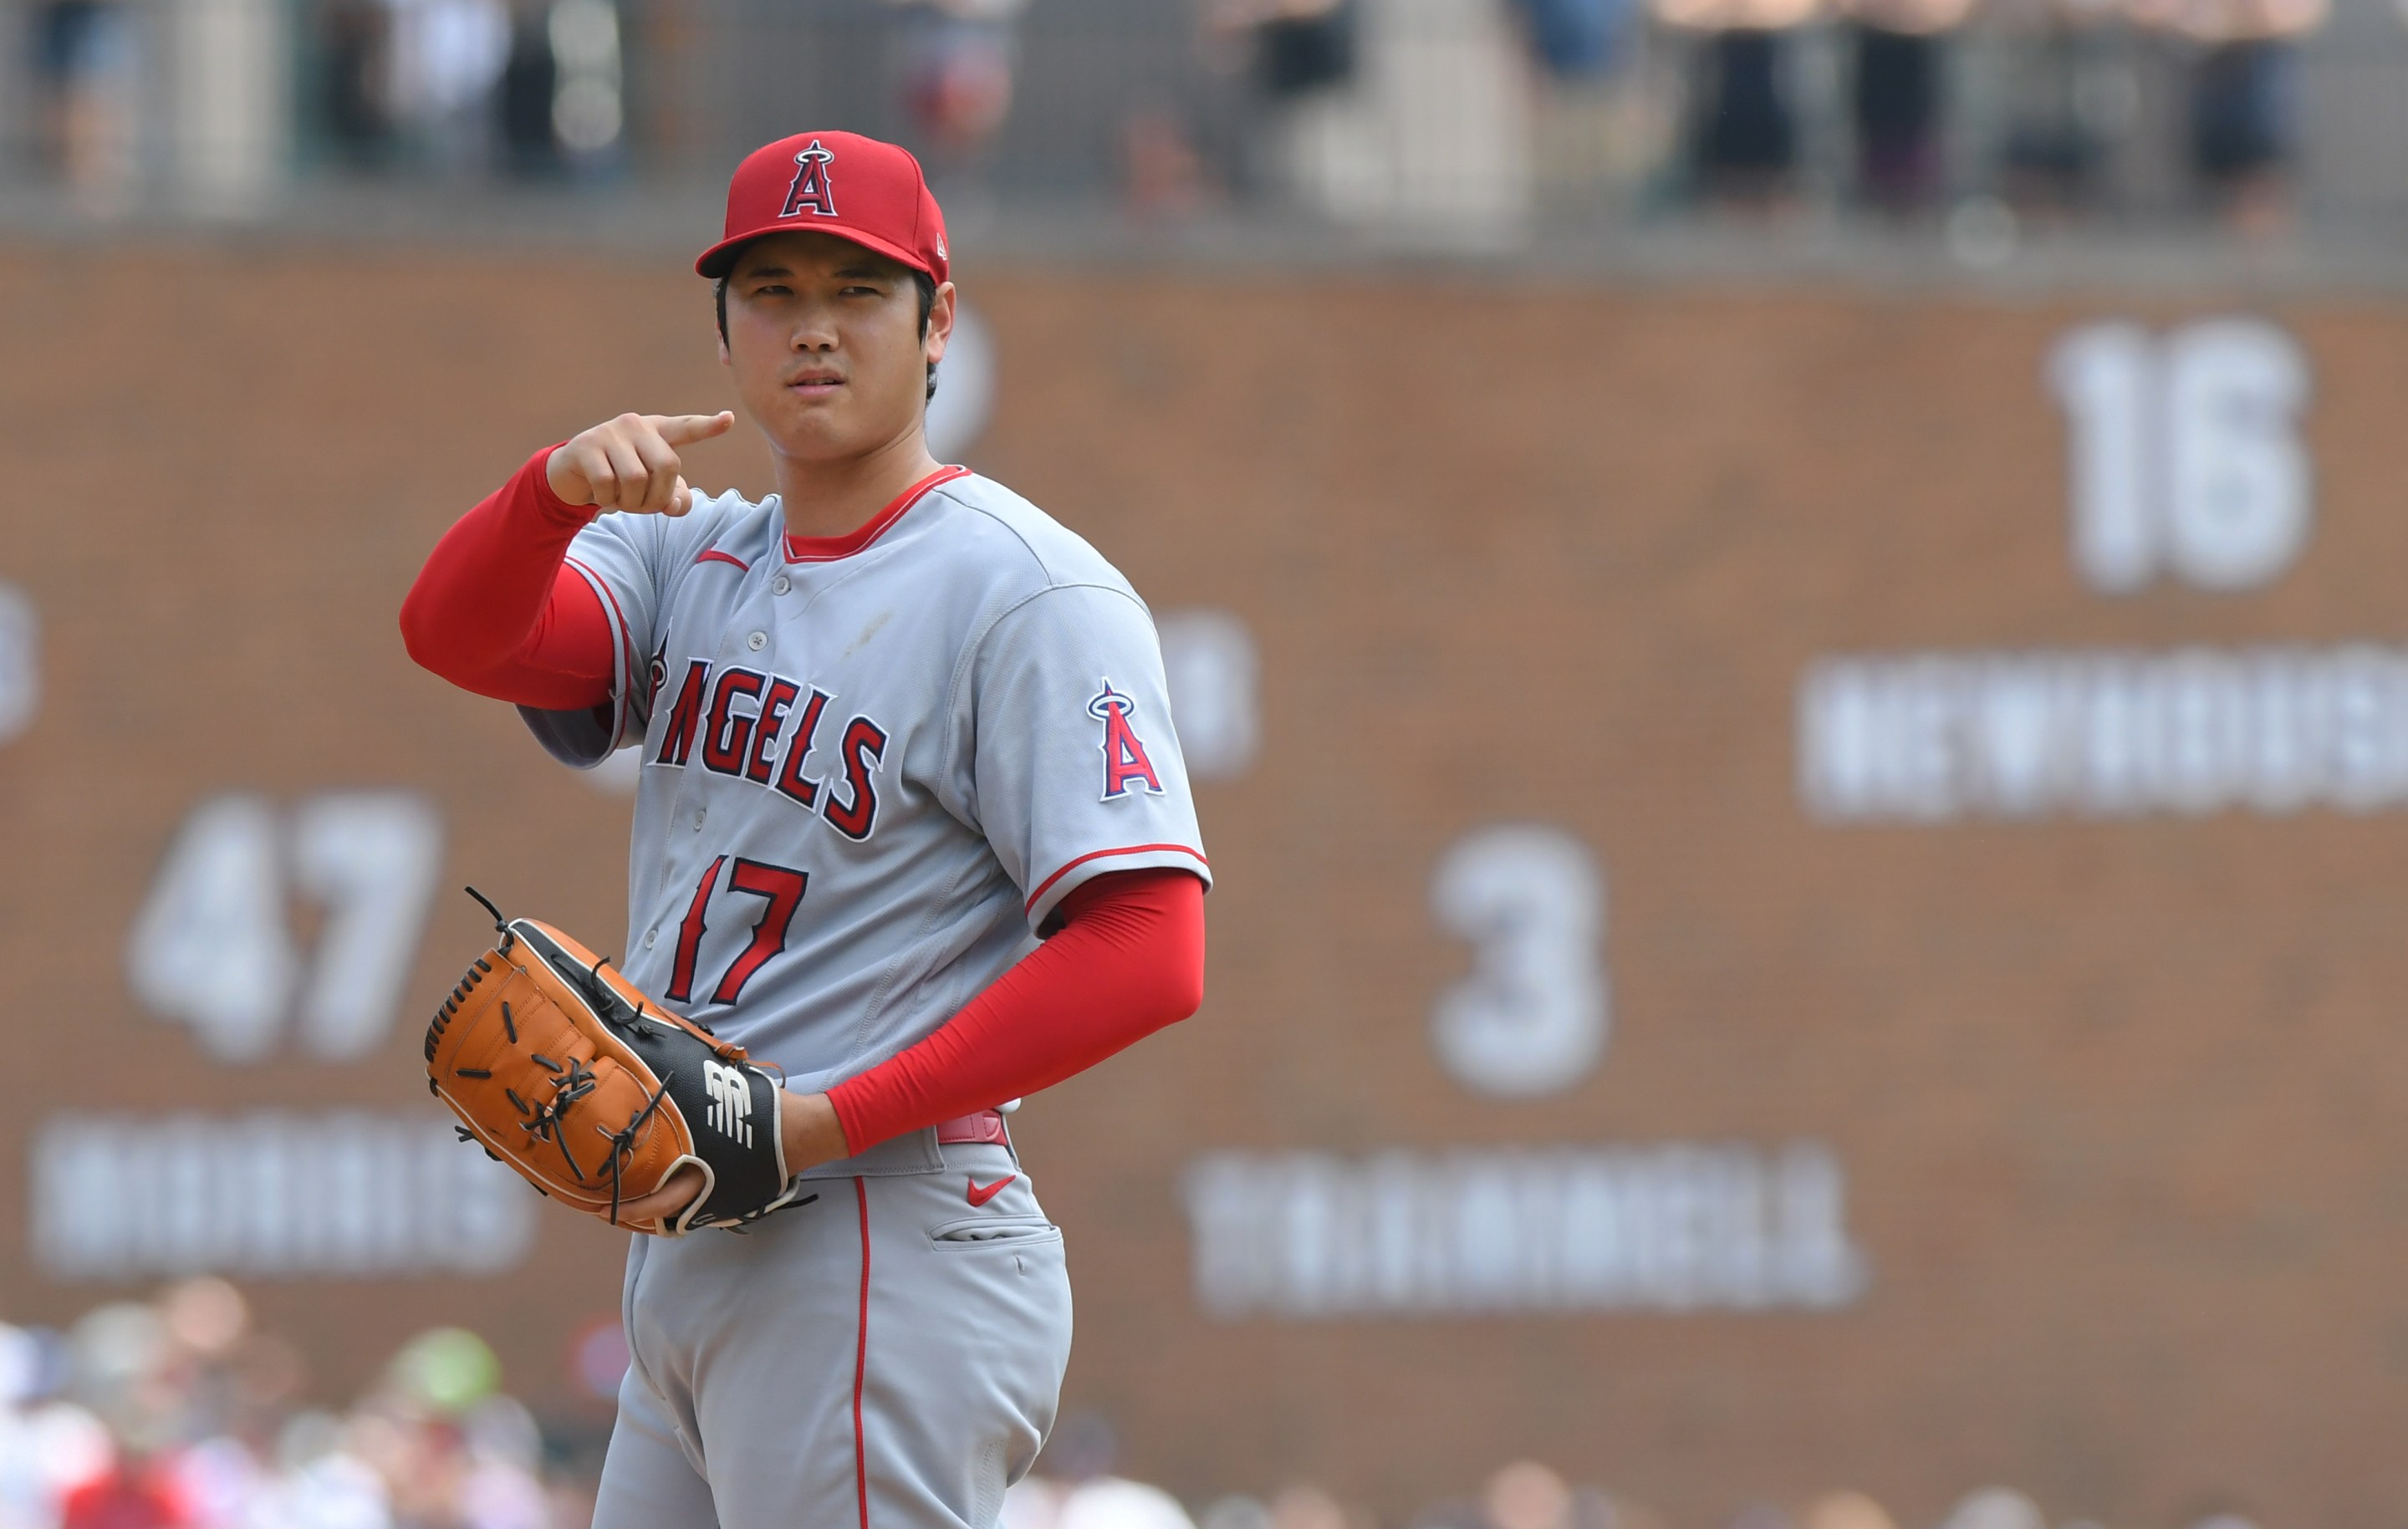 Shohei Ohtani #17 of the Los Angeles Angels looks on from the pitchers mound in the bottom of the 2nd inning of game one of a doubleheader against the Detroit Tigers at Comerica Park on July 27, 2023 in Detroit, Michigan. The Angels defeated the Tigers 6-0. Ohtani pitched a complete game, one-hit shutout.